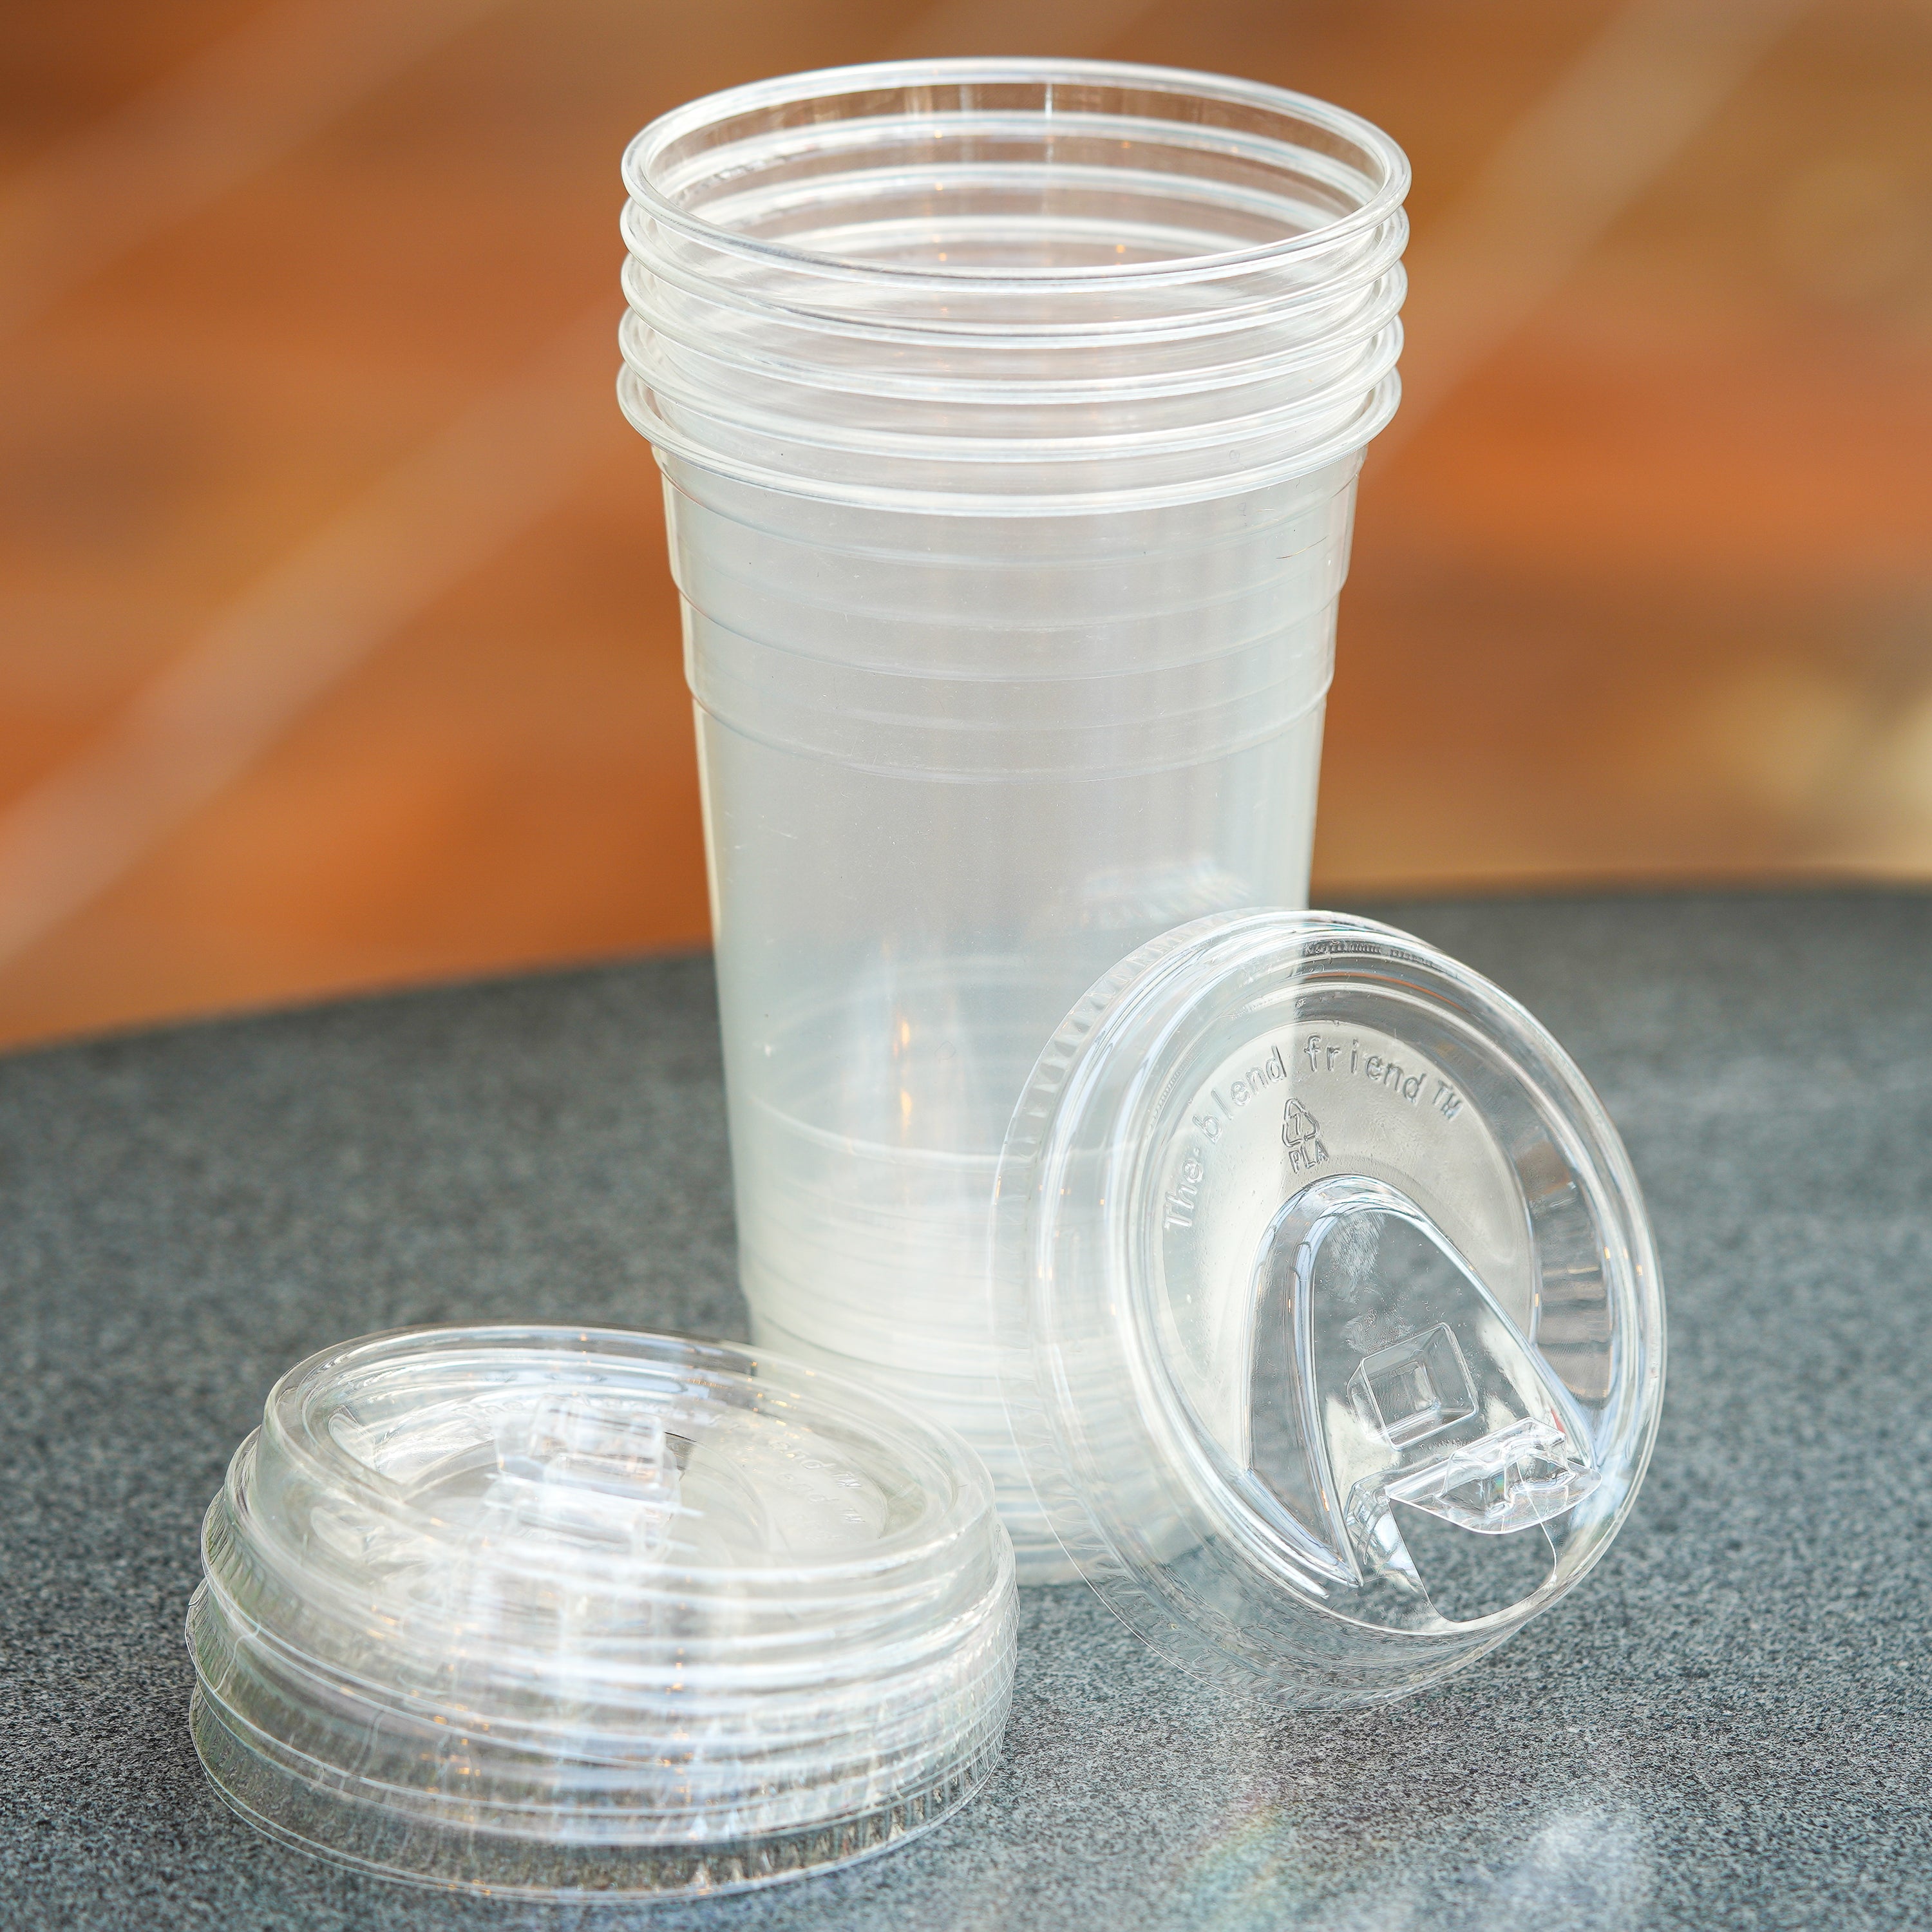 Disposable cup attachment for the Nutribullet – The Blend Friend